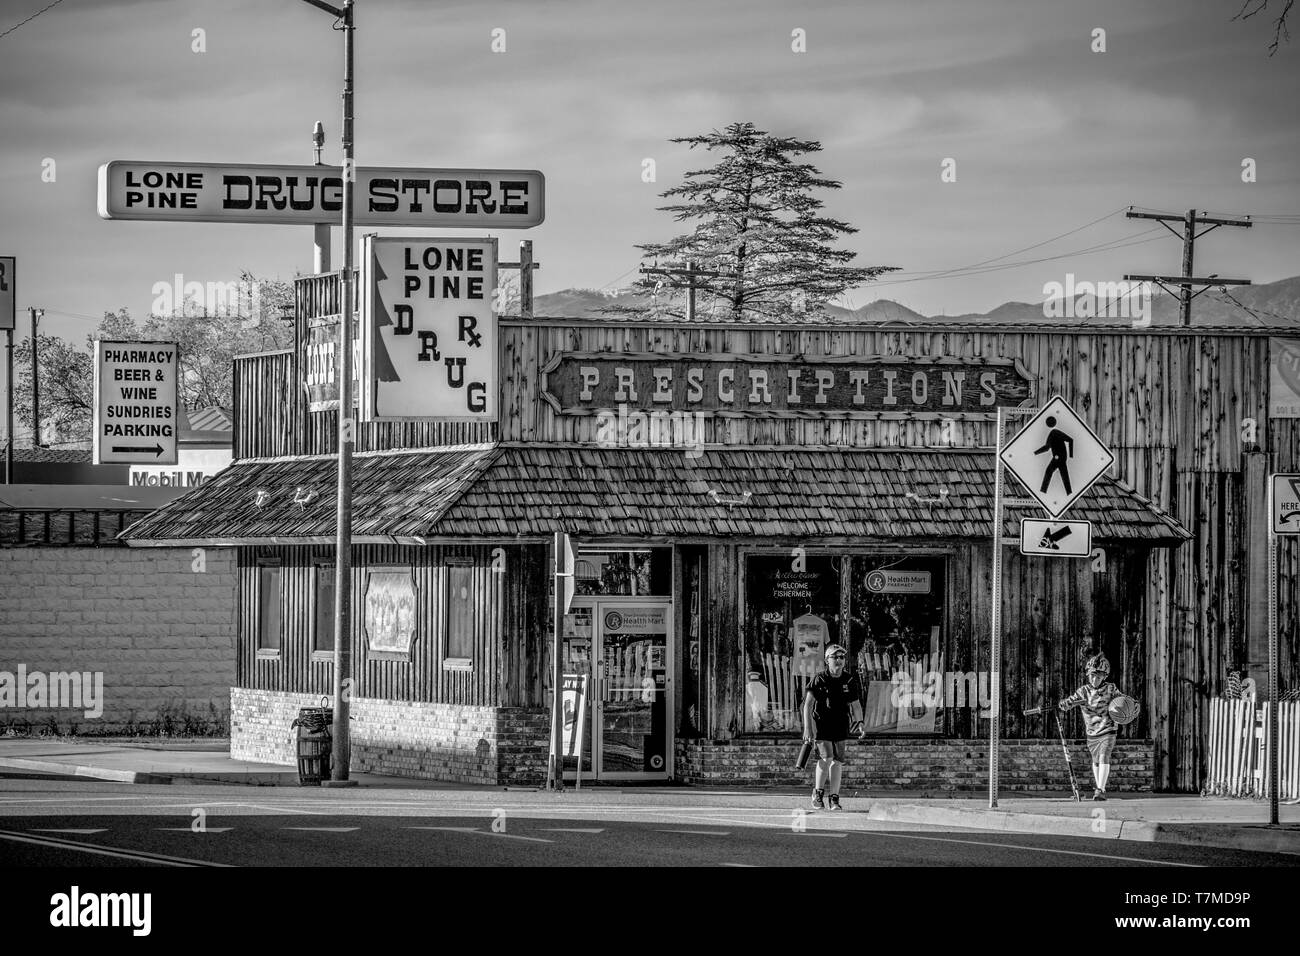 Drug store in the historic village of Lone Pine - LONE PINE CA, UNITED STATES OF AMERICA - MARCH 29, 2019 Stock Photo